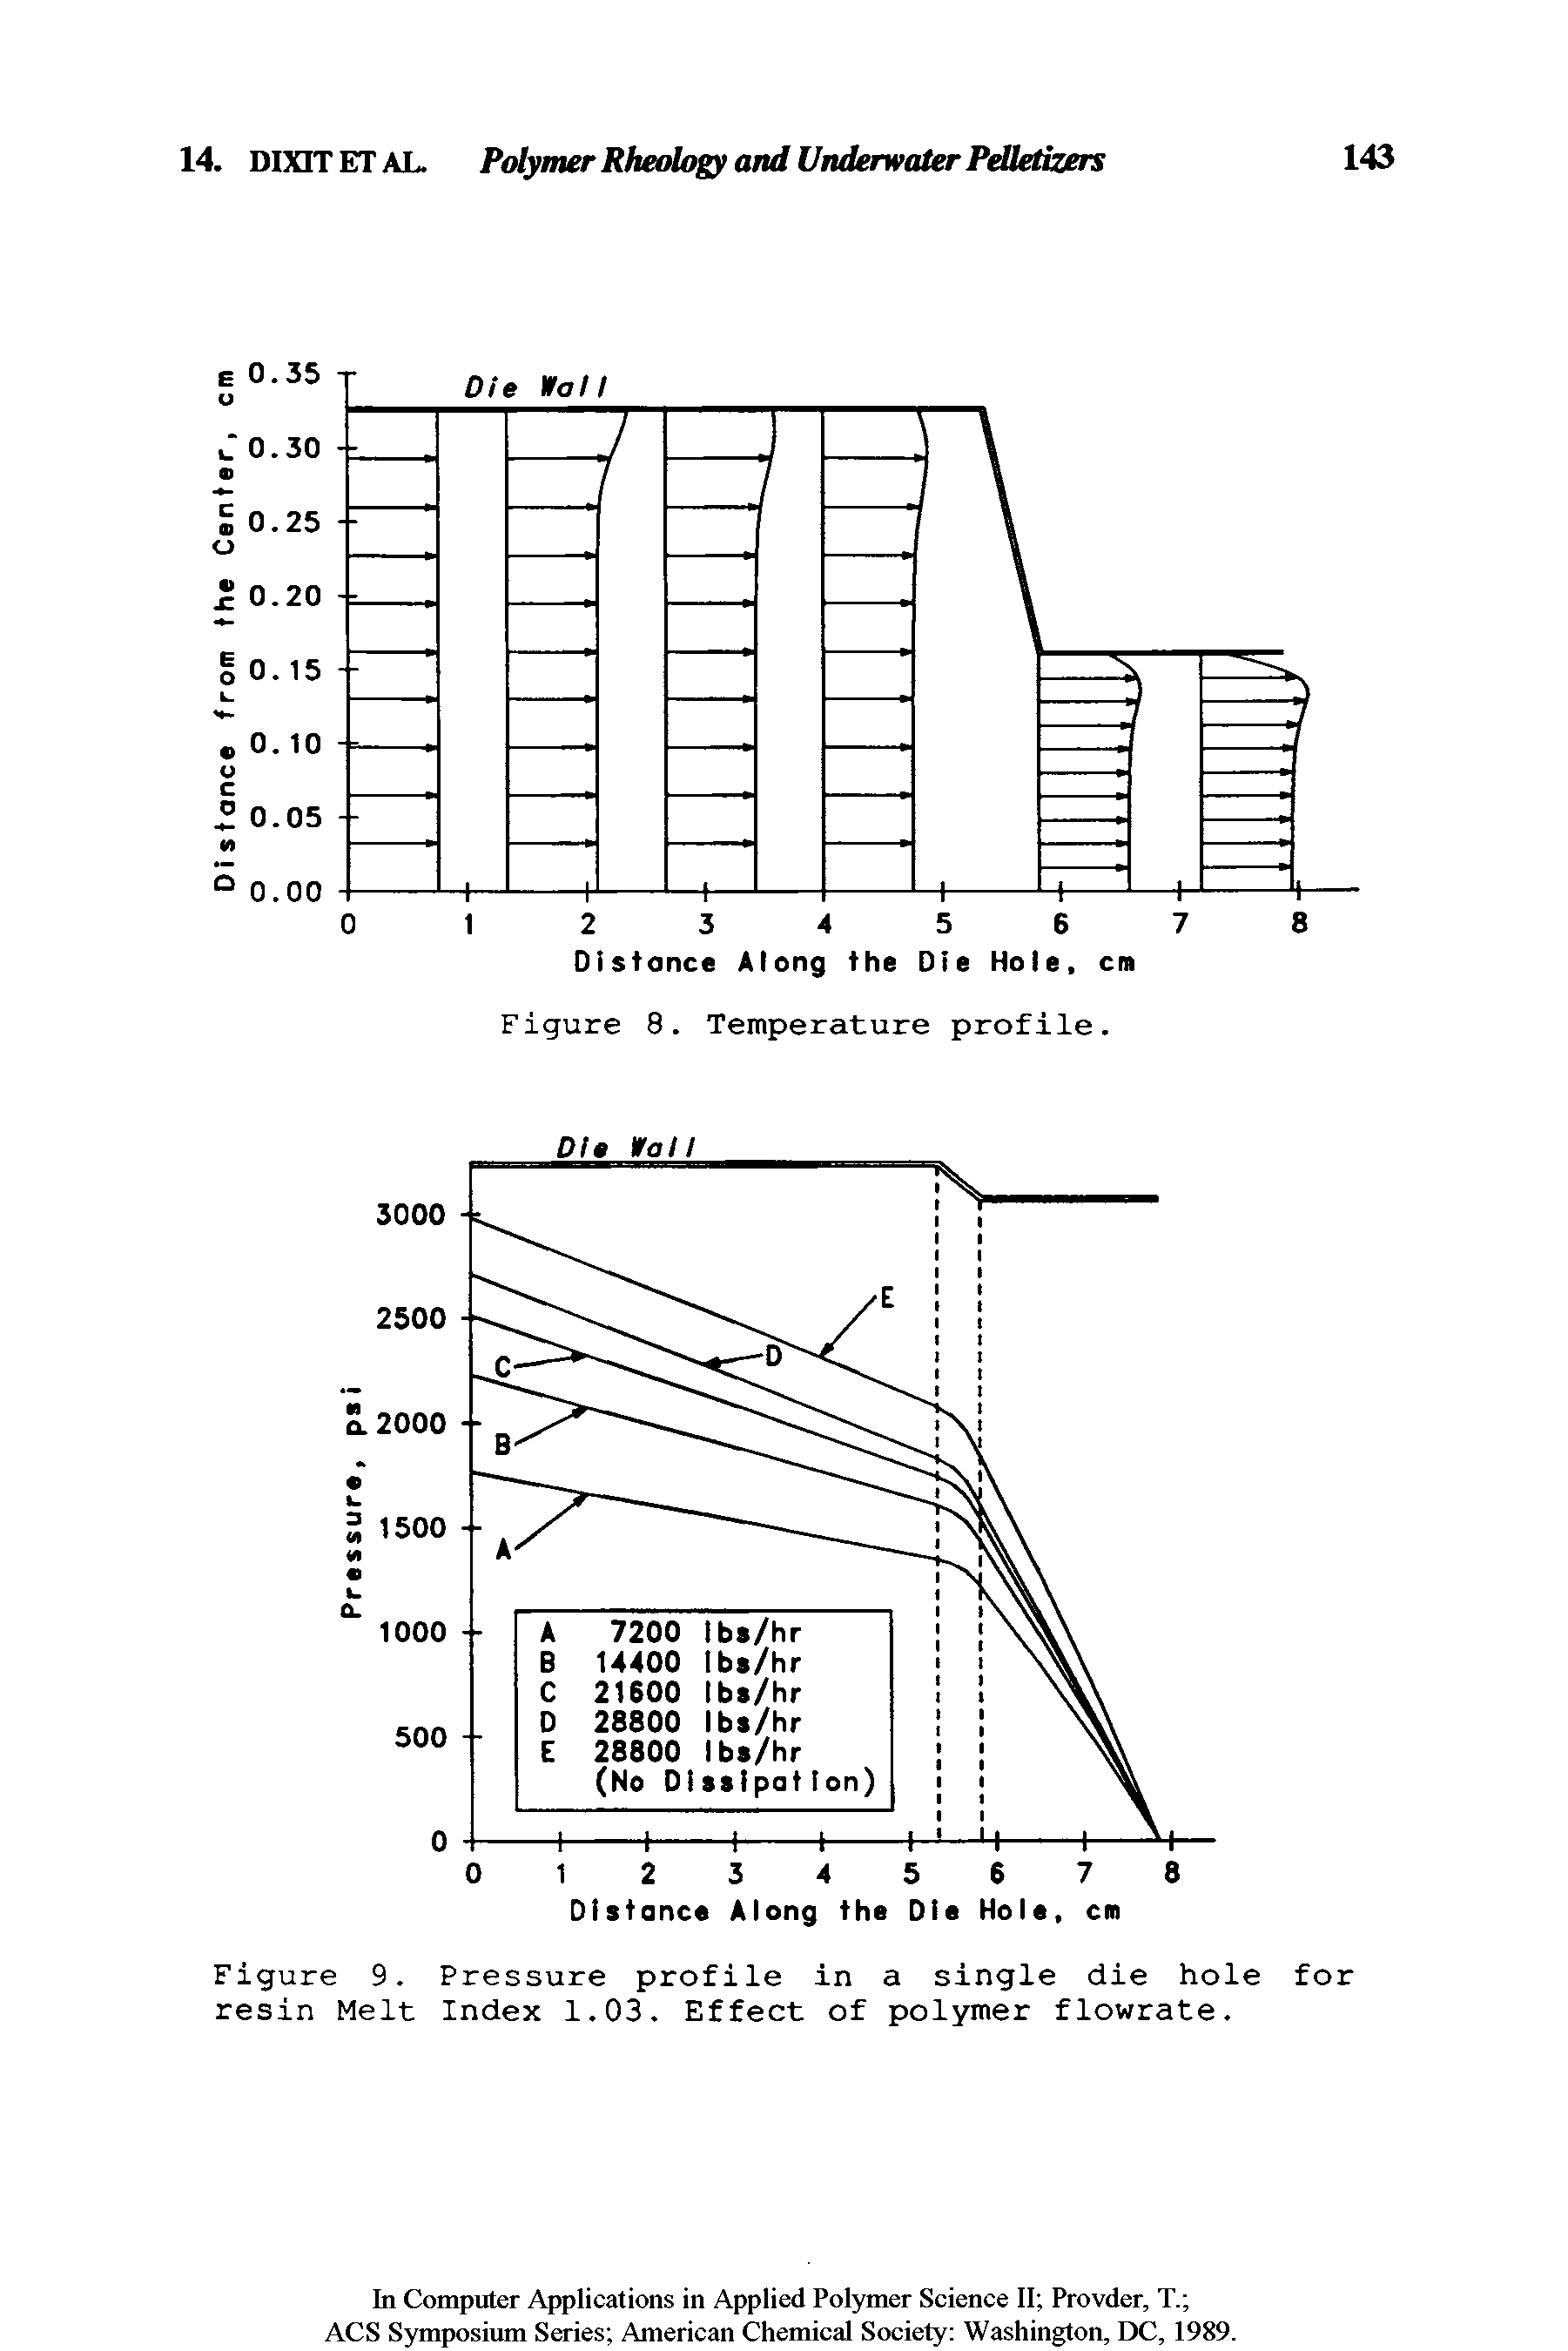 Figure 9. Pressure profile in a single die hole for resin Melt Index 1.03. Effect of polymer flowrate.